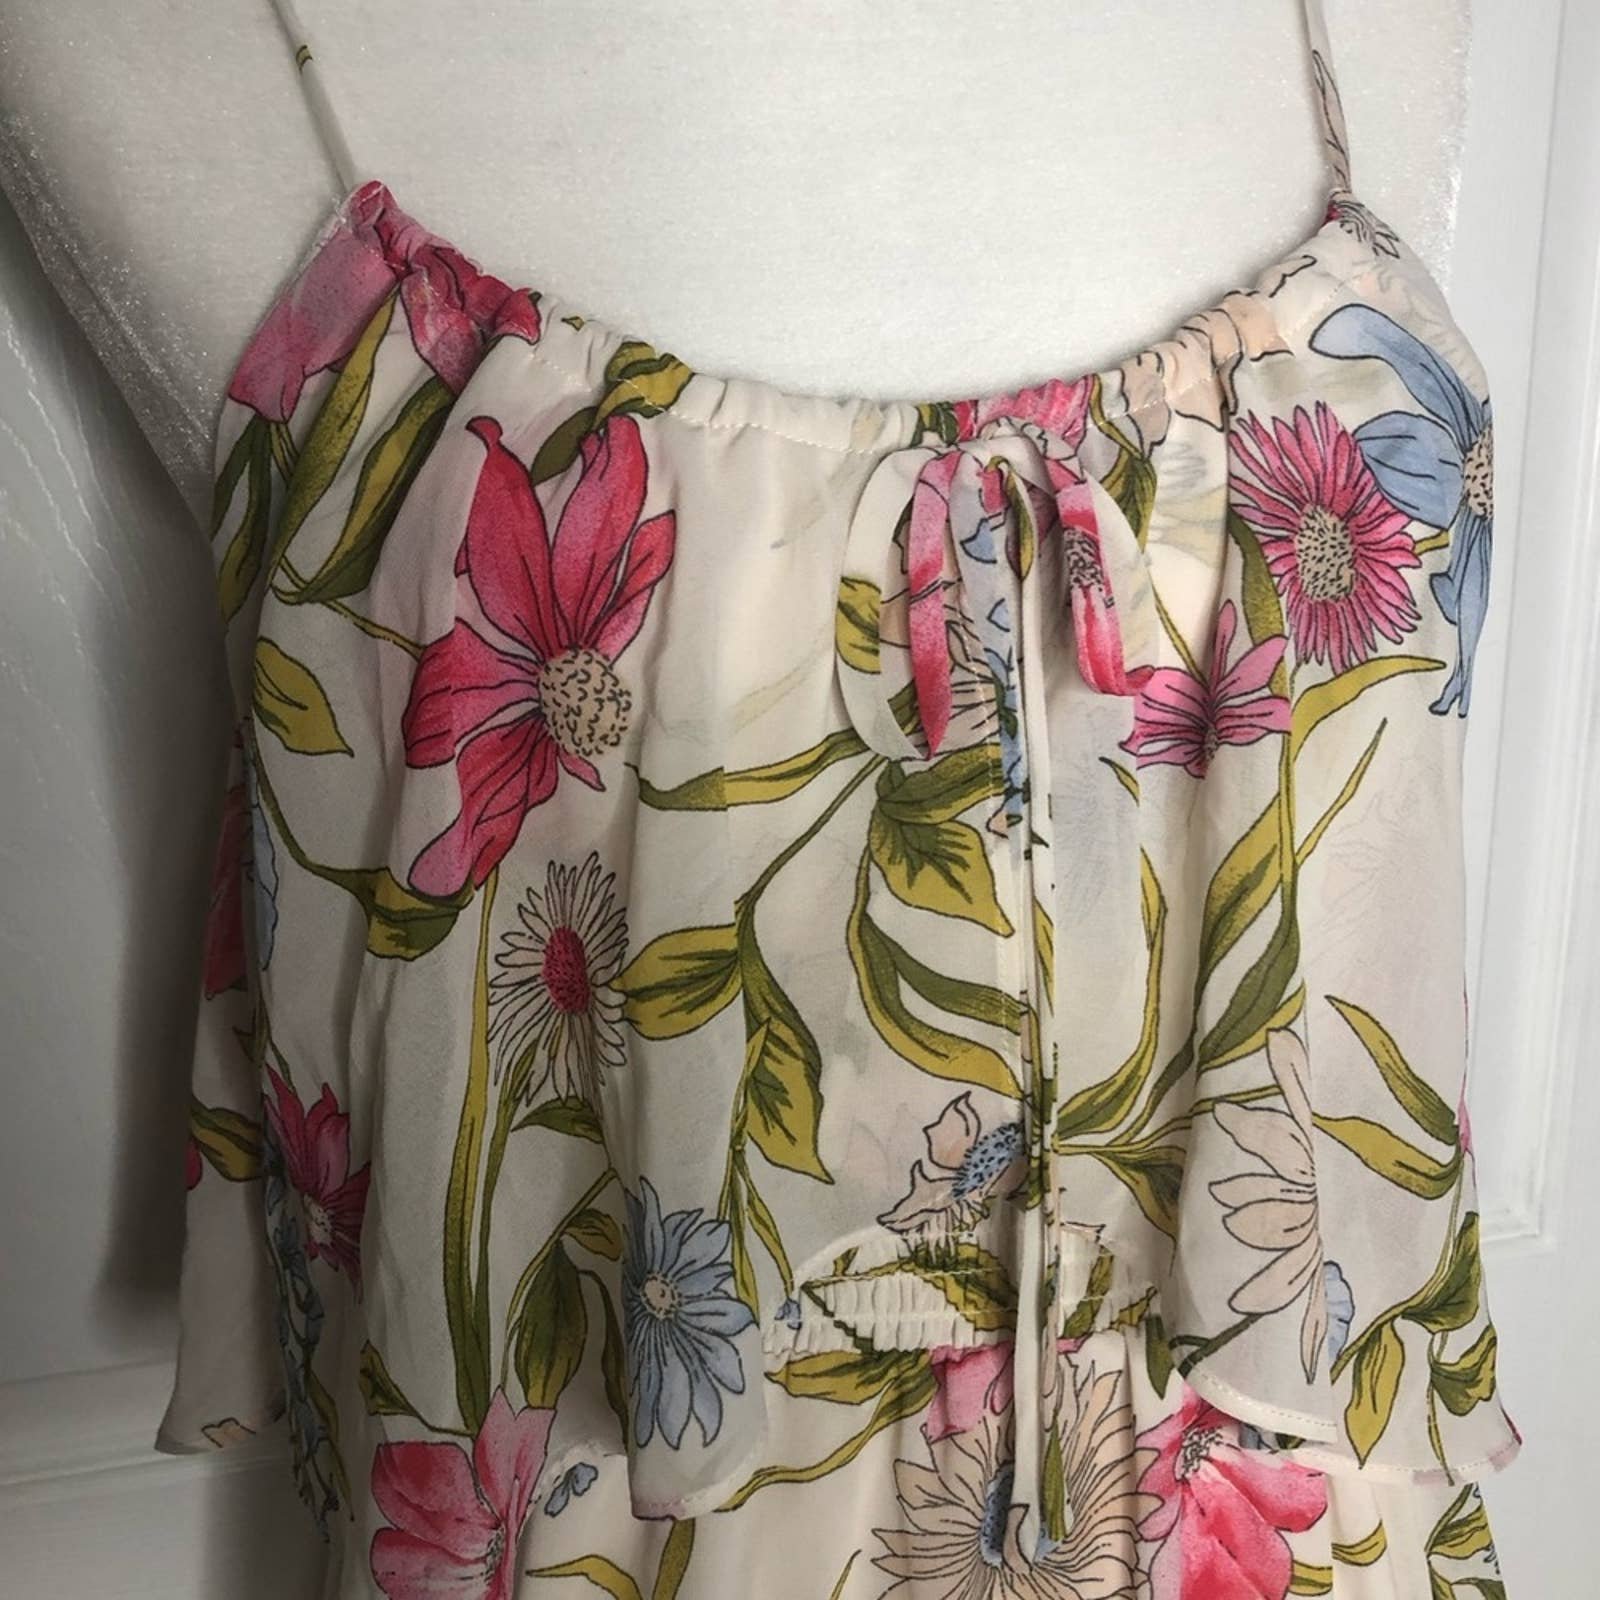 Popular NWT June and Hudson floral hi low dress lDSOAvzo8 Buying Cheap